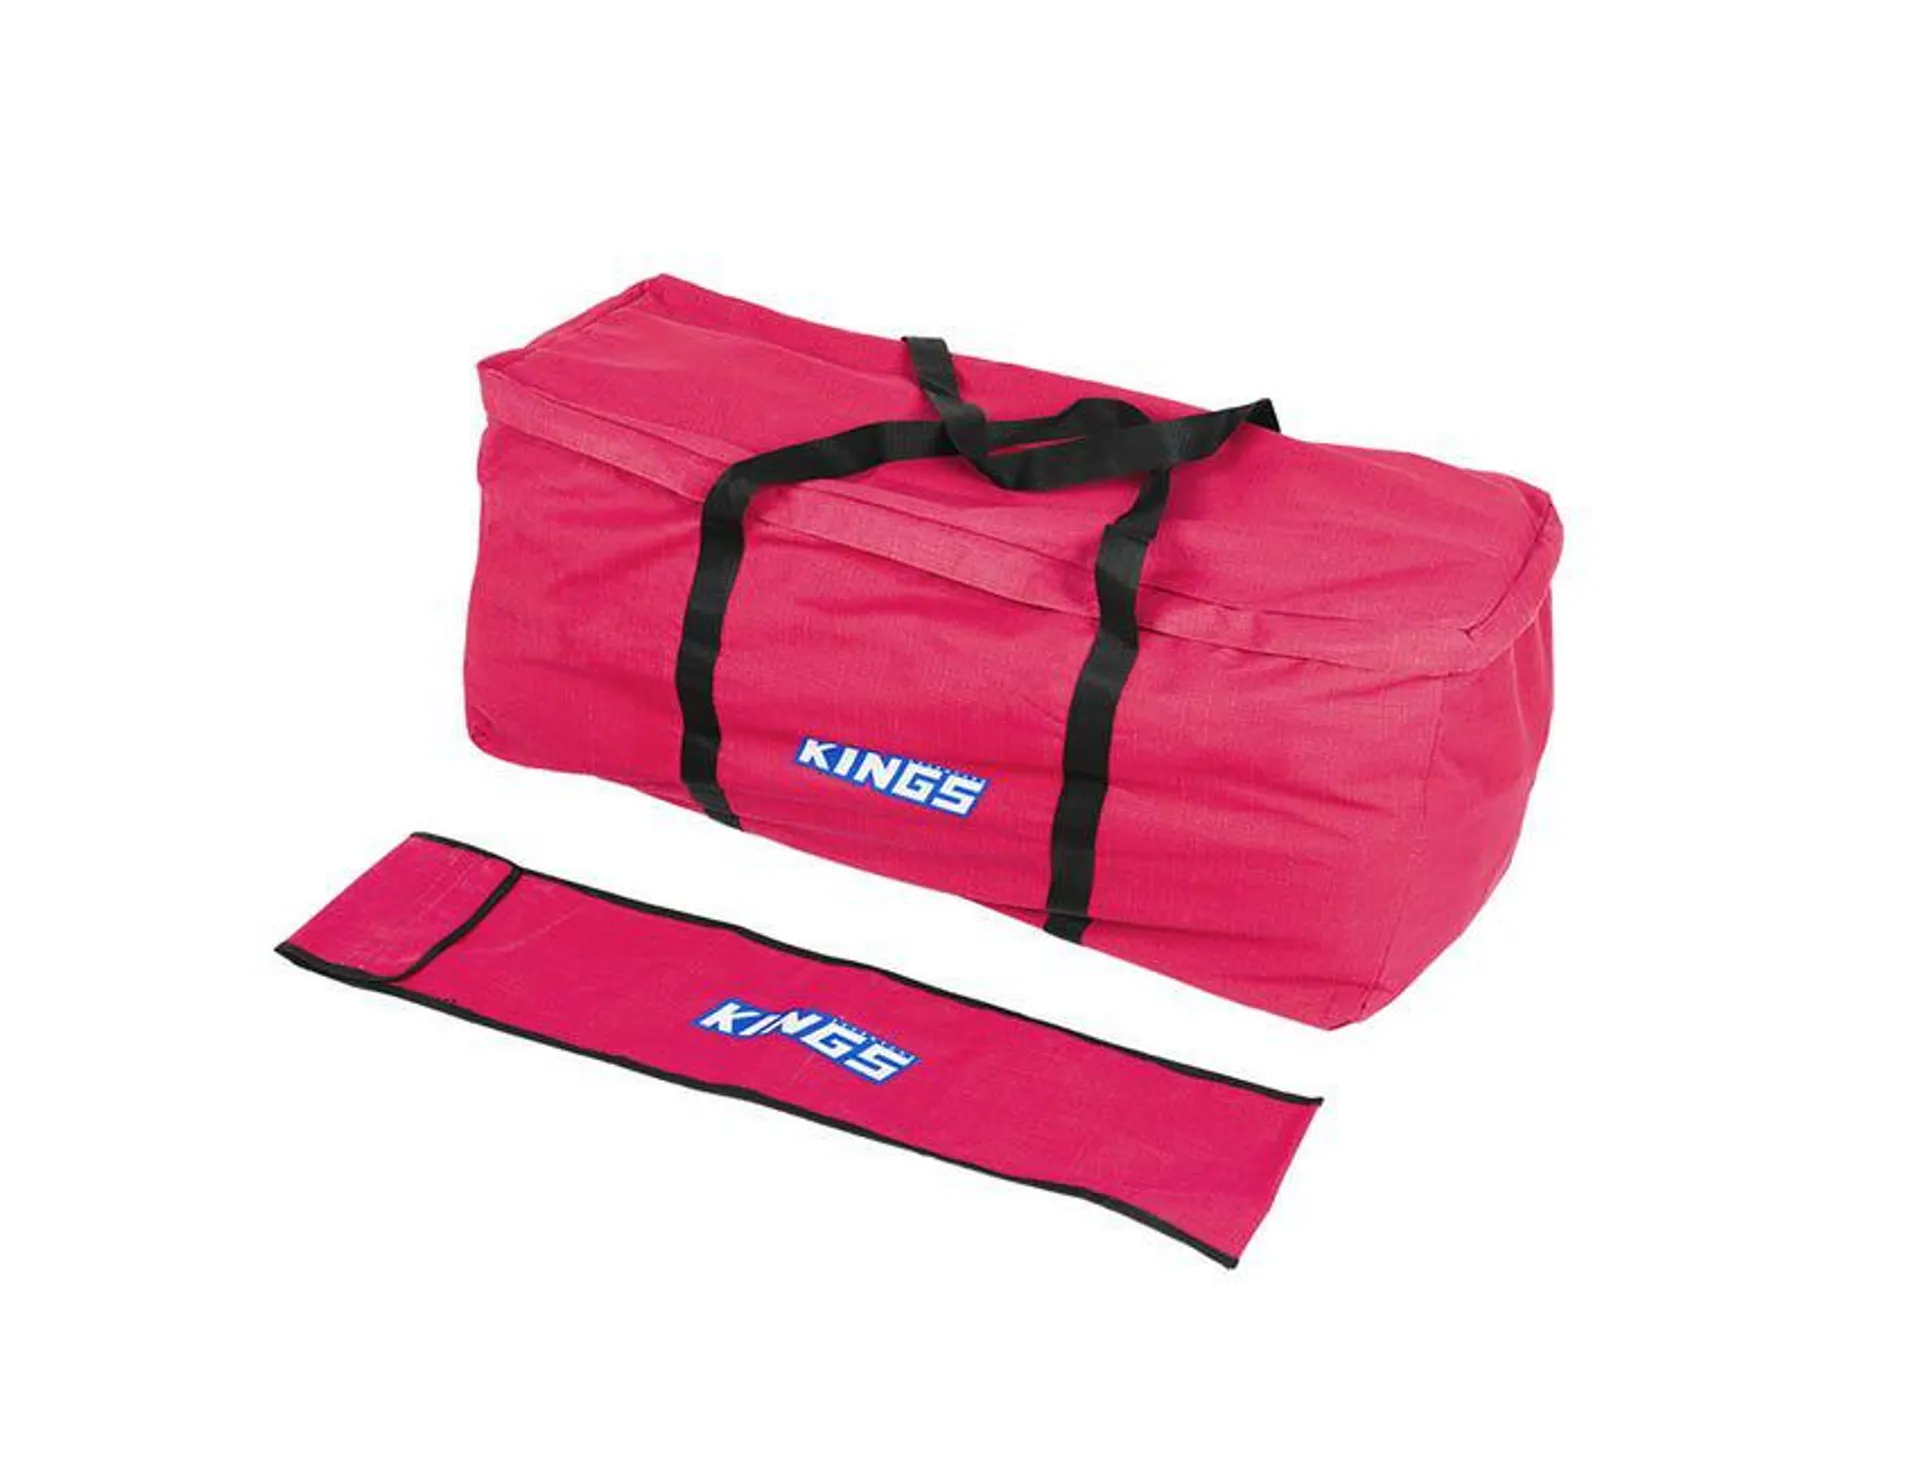 Kings Pink Deluxe Single Swag Premium Canvas Bag | 400GSM Polycotton Ripstop Canvas | Heavy-Duty Zippers & Handles